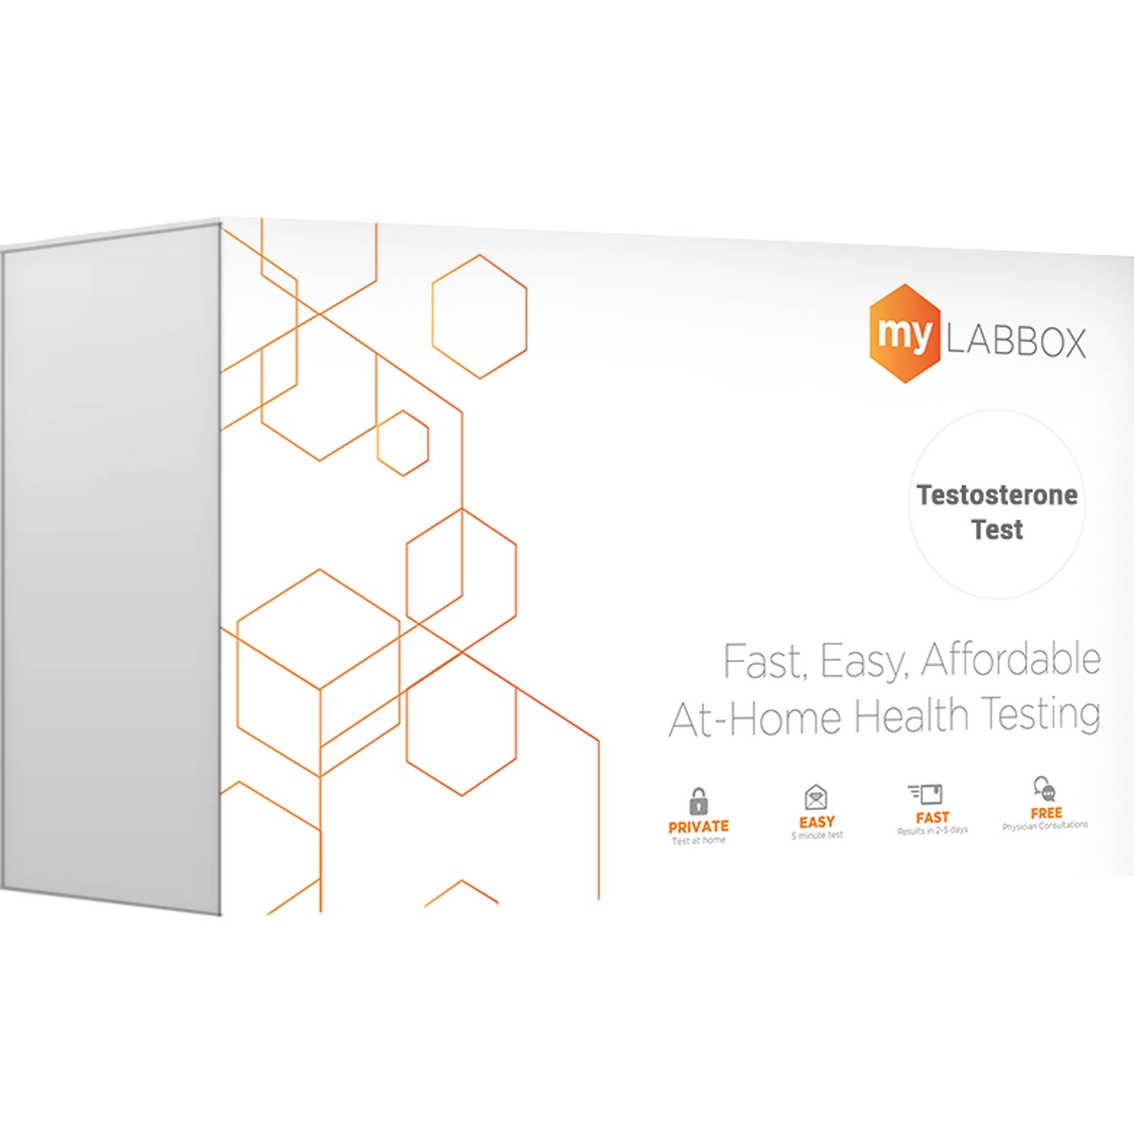 Why Would You Need to Take an At-Home Testosterone Level Test?